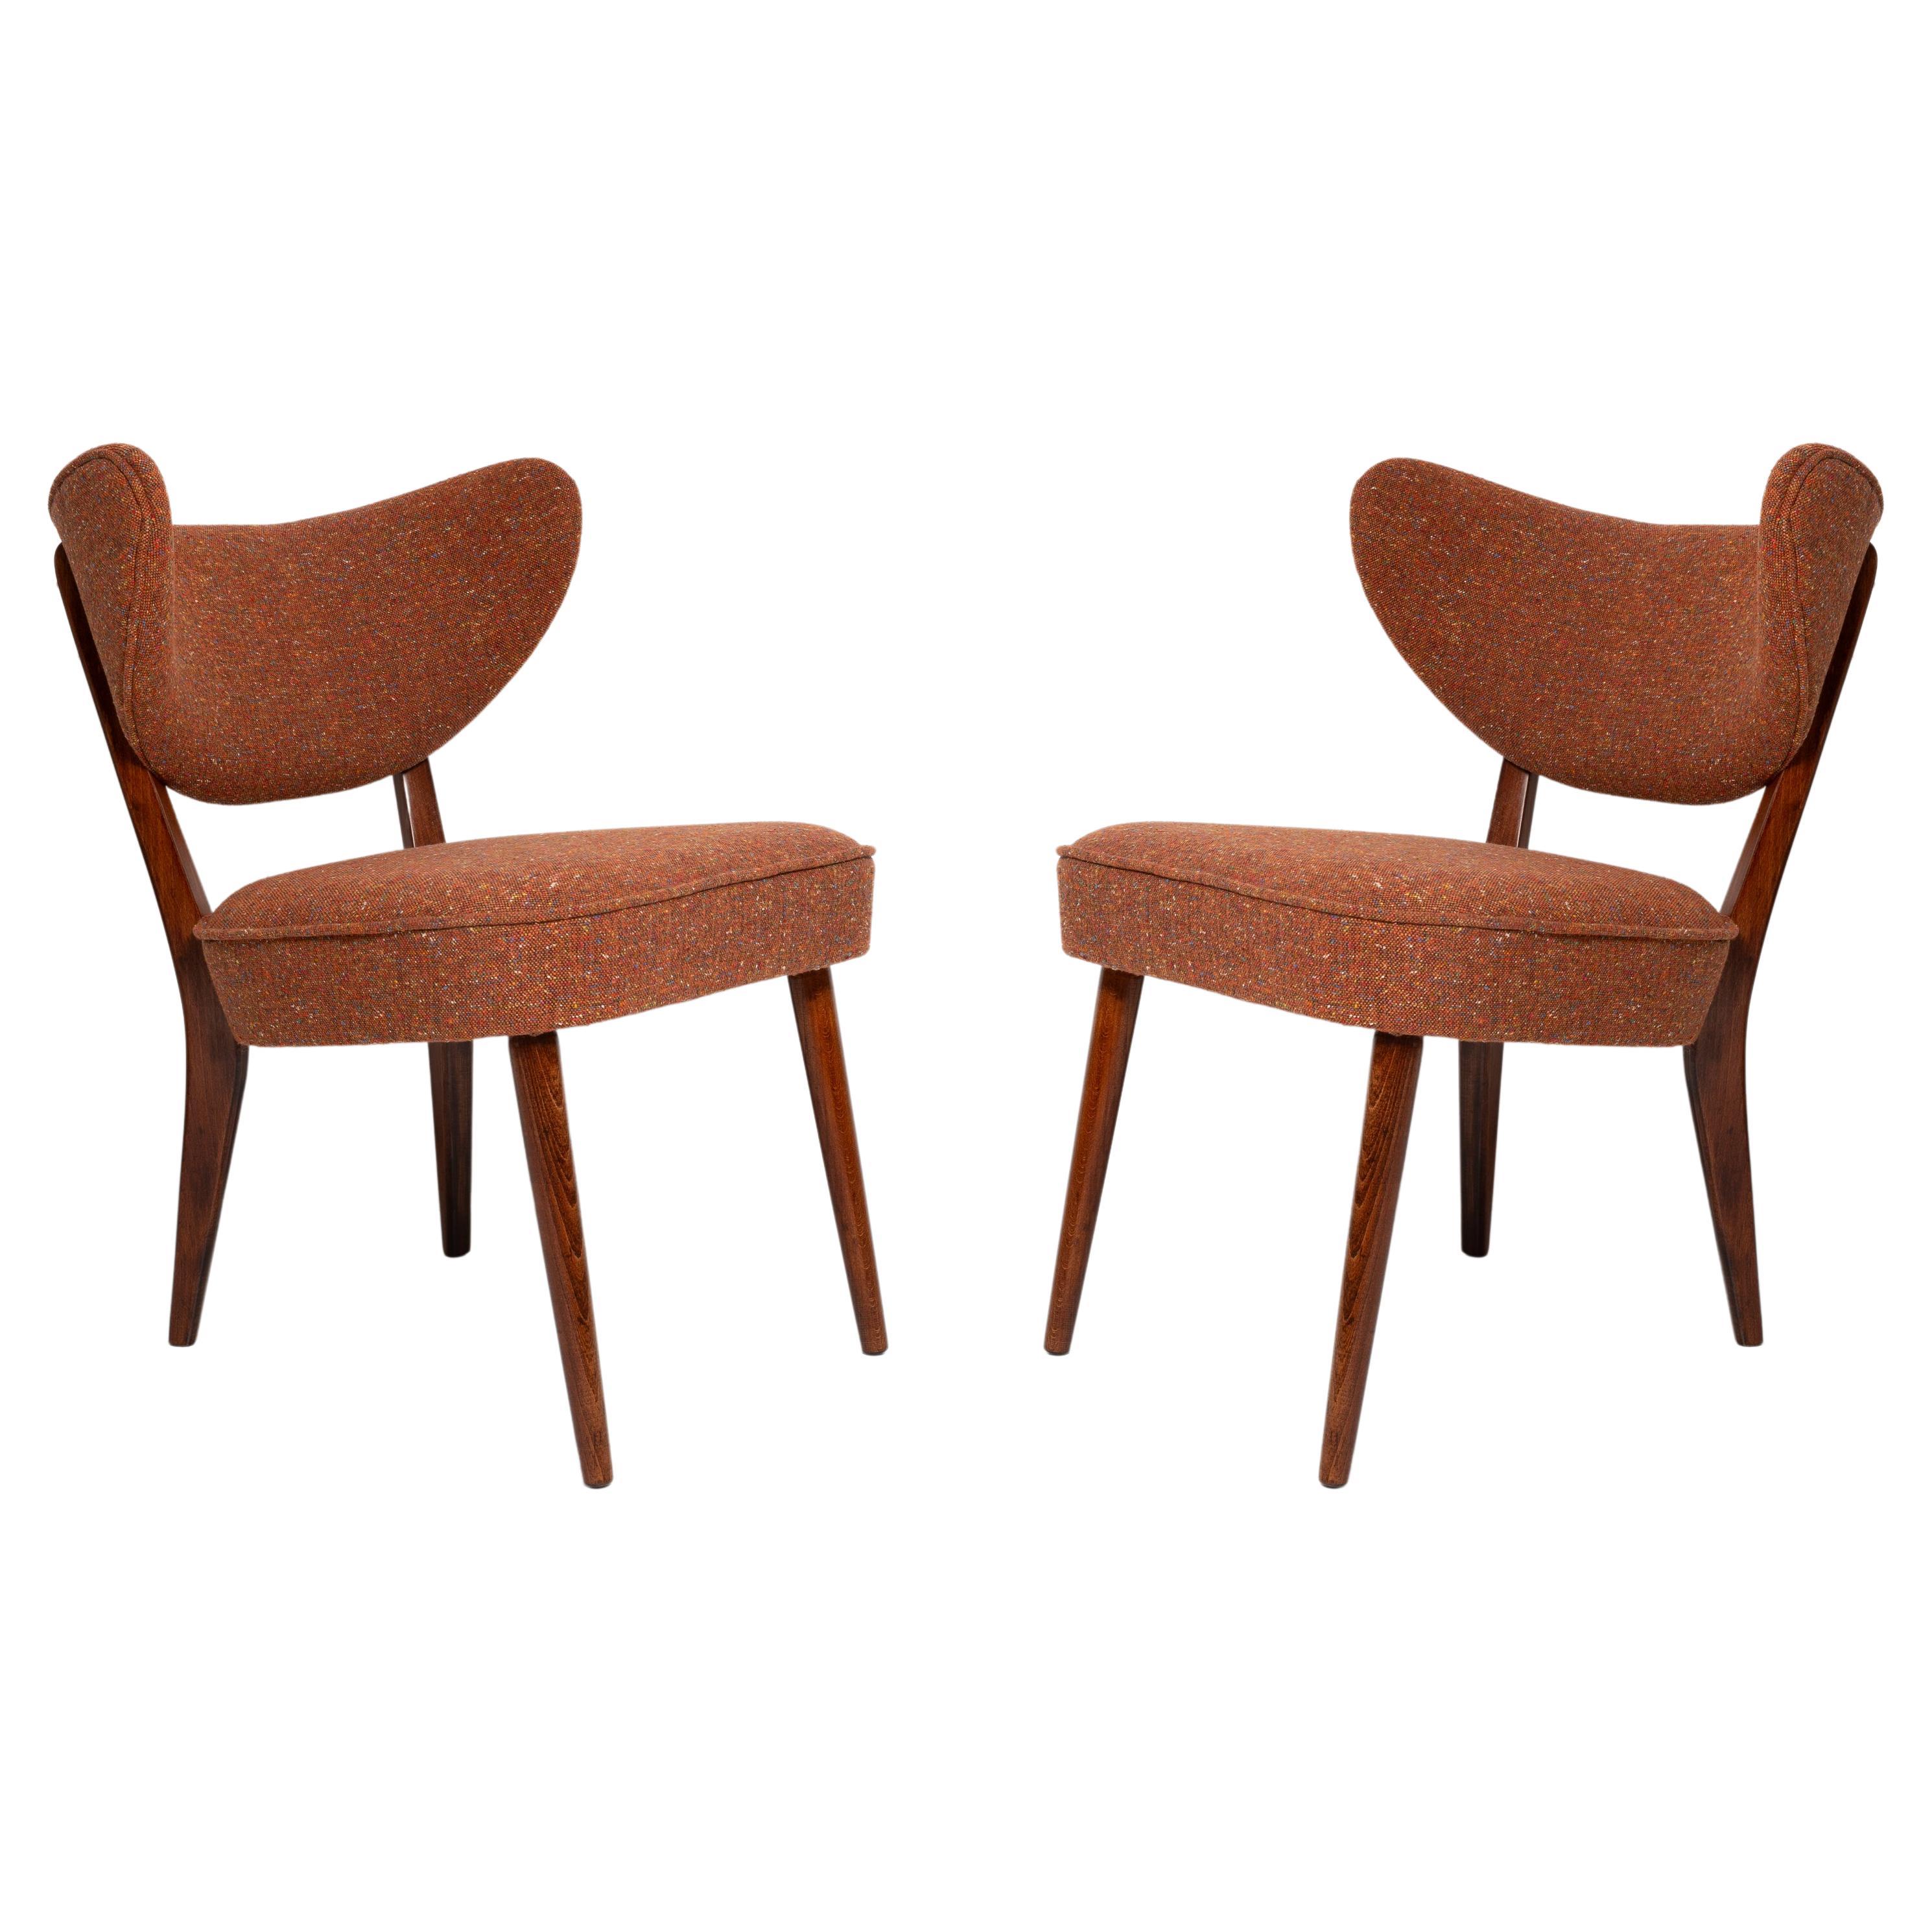 Pair of Orange Wool Shell Club Chairs, by Vintola Studio, Europe, Poland For Sale